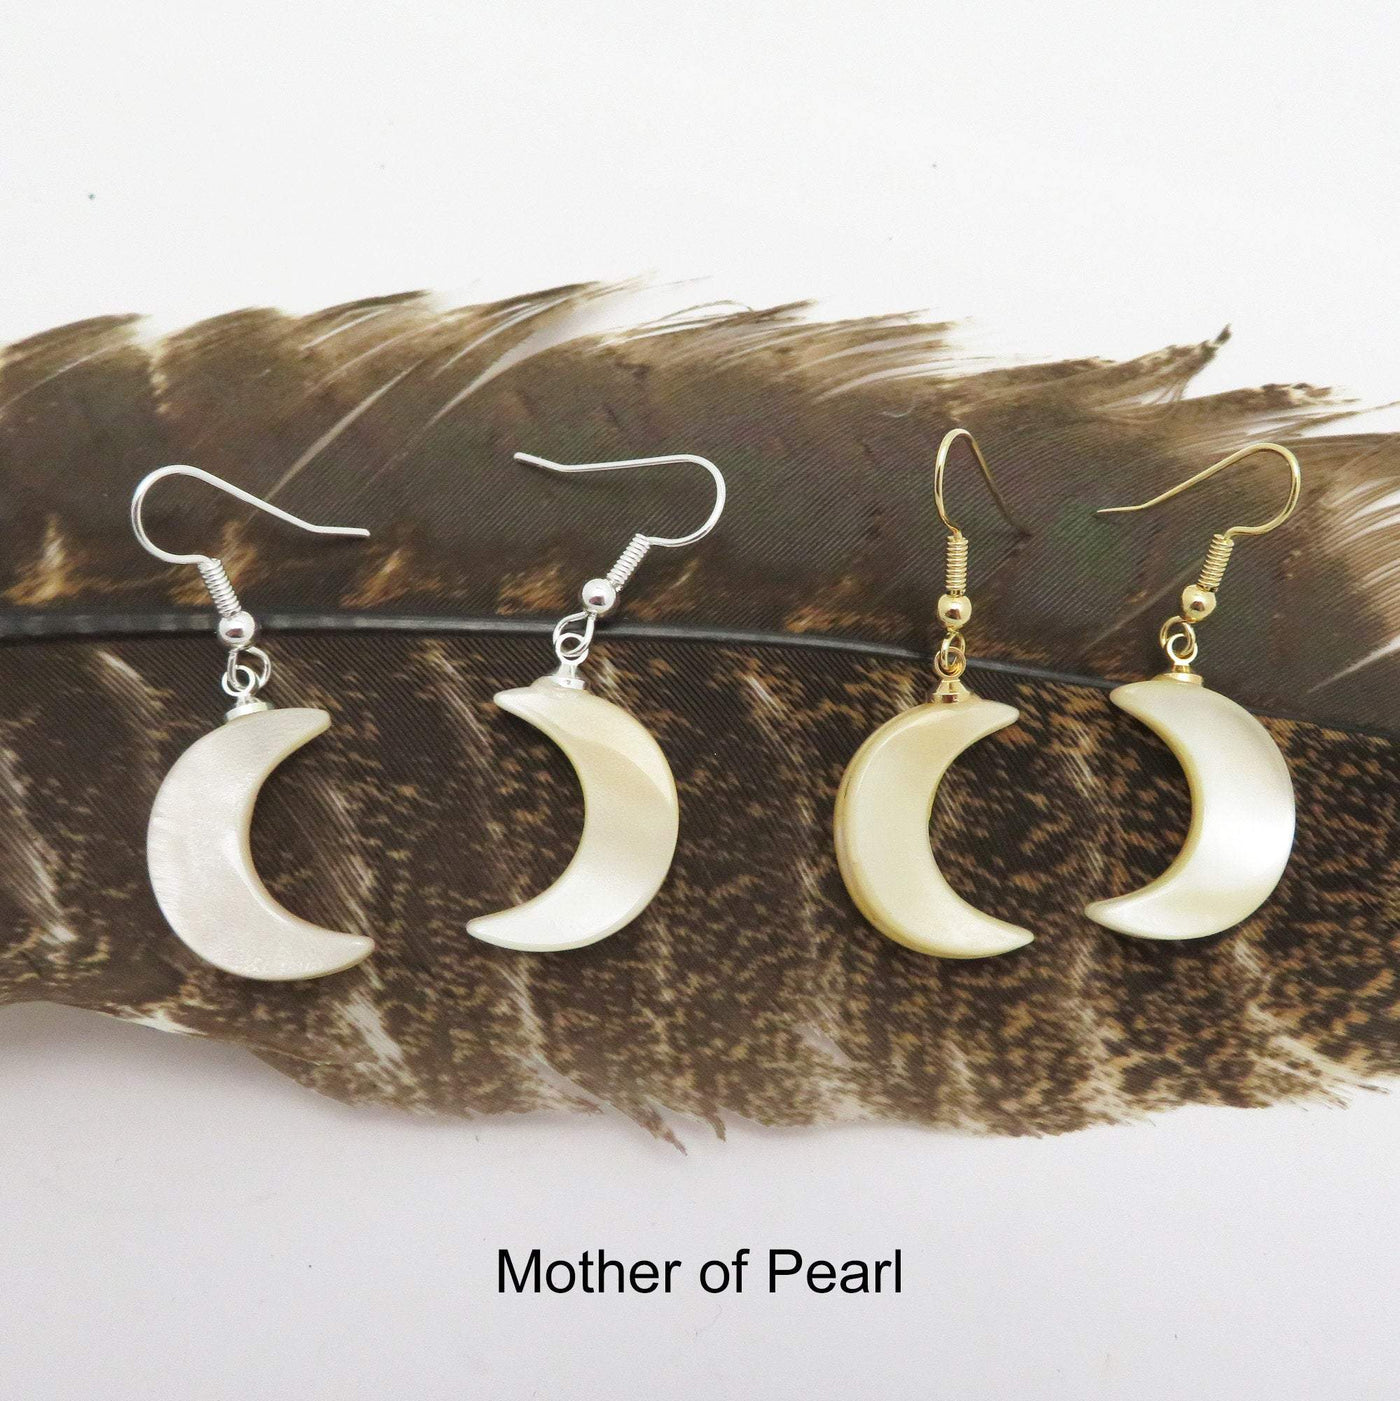 Two pairs of Mother of Pearl Gemstone Moon Dangle Earrings in both gold and silver